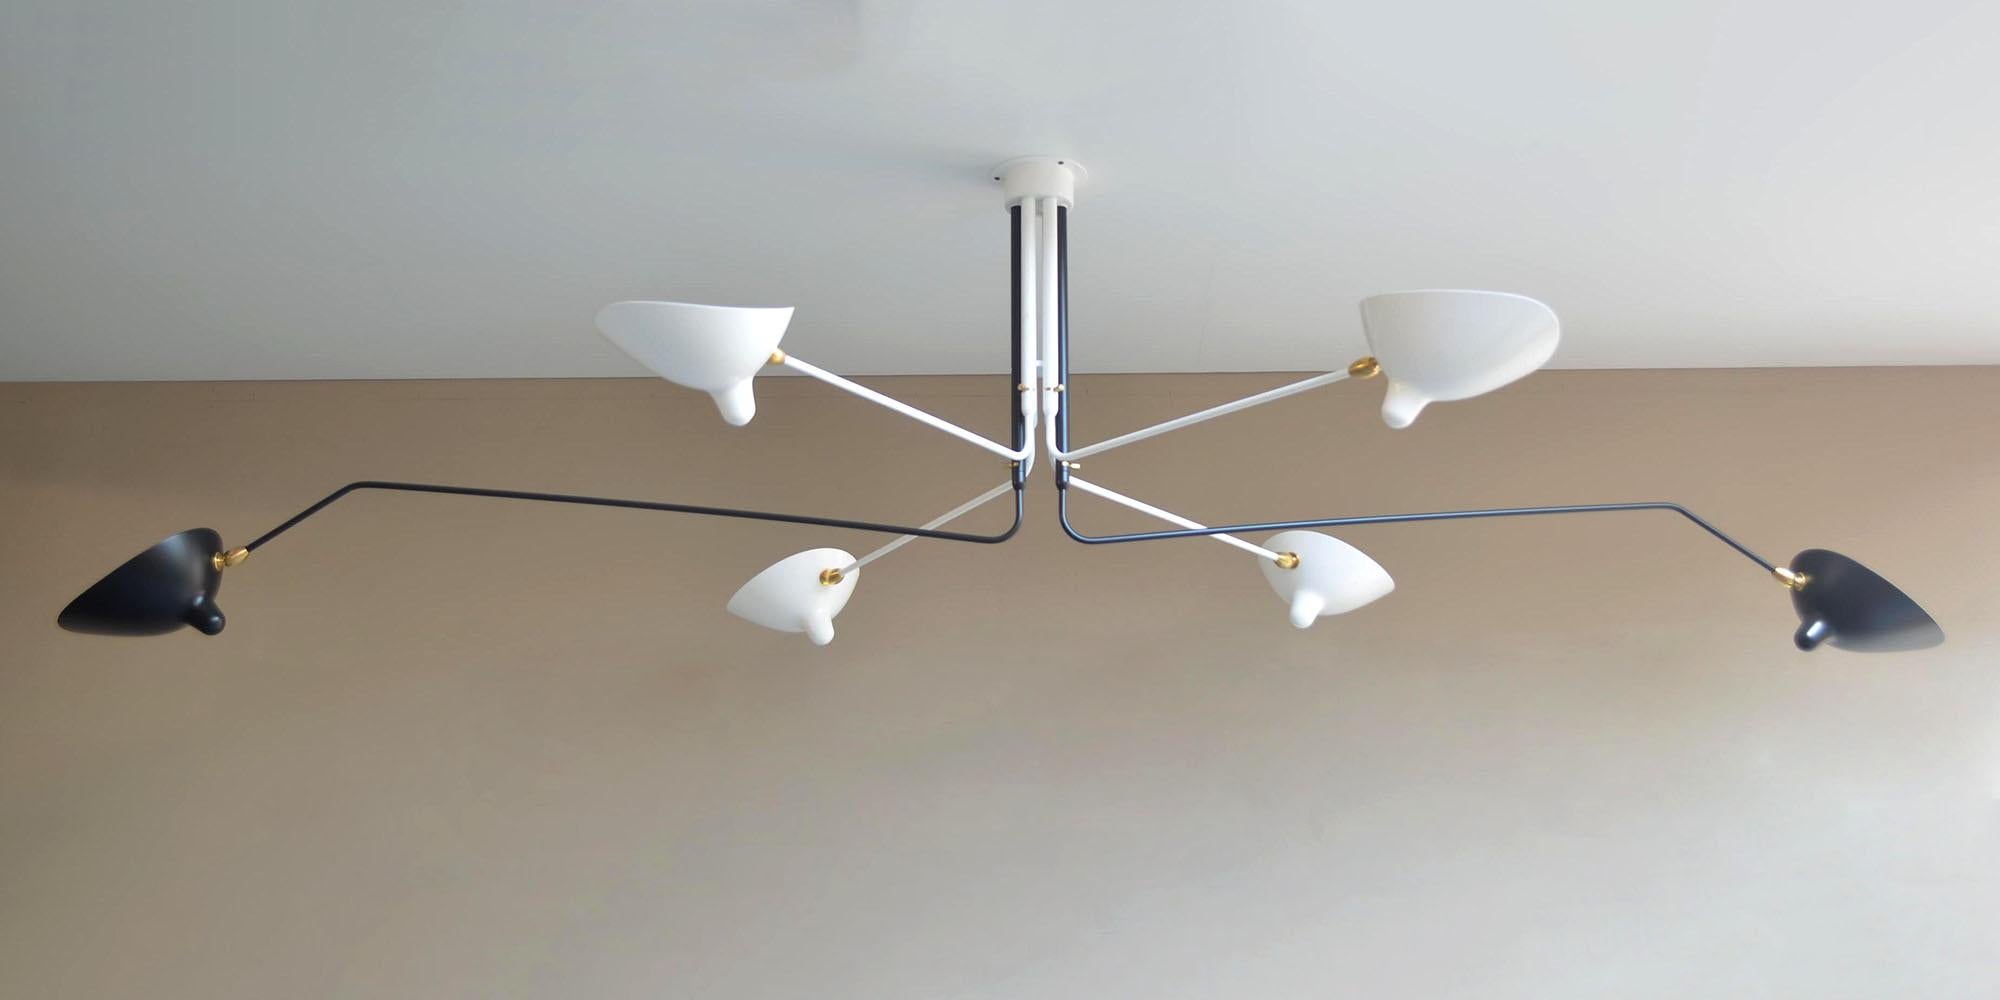 French Serge Mouille - Ceiling Lamp 6 Rotating Arms - DROP, ARM LENGTH CUSTOMIZABLE! For Sale